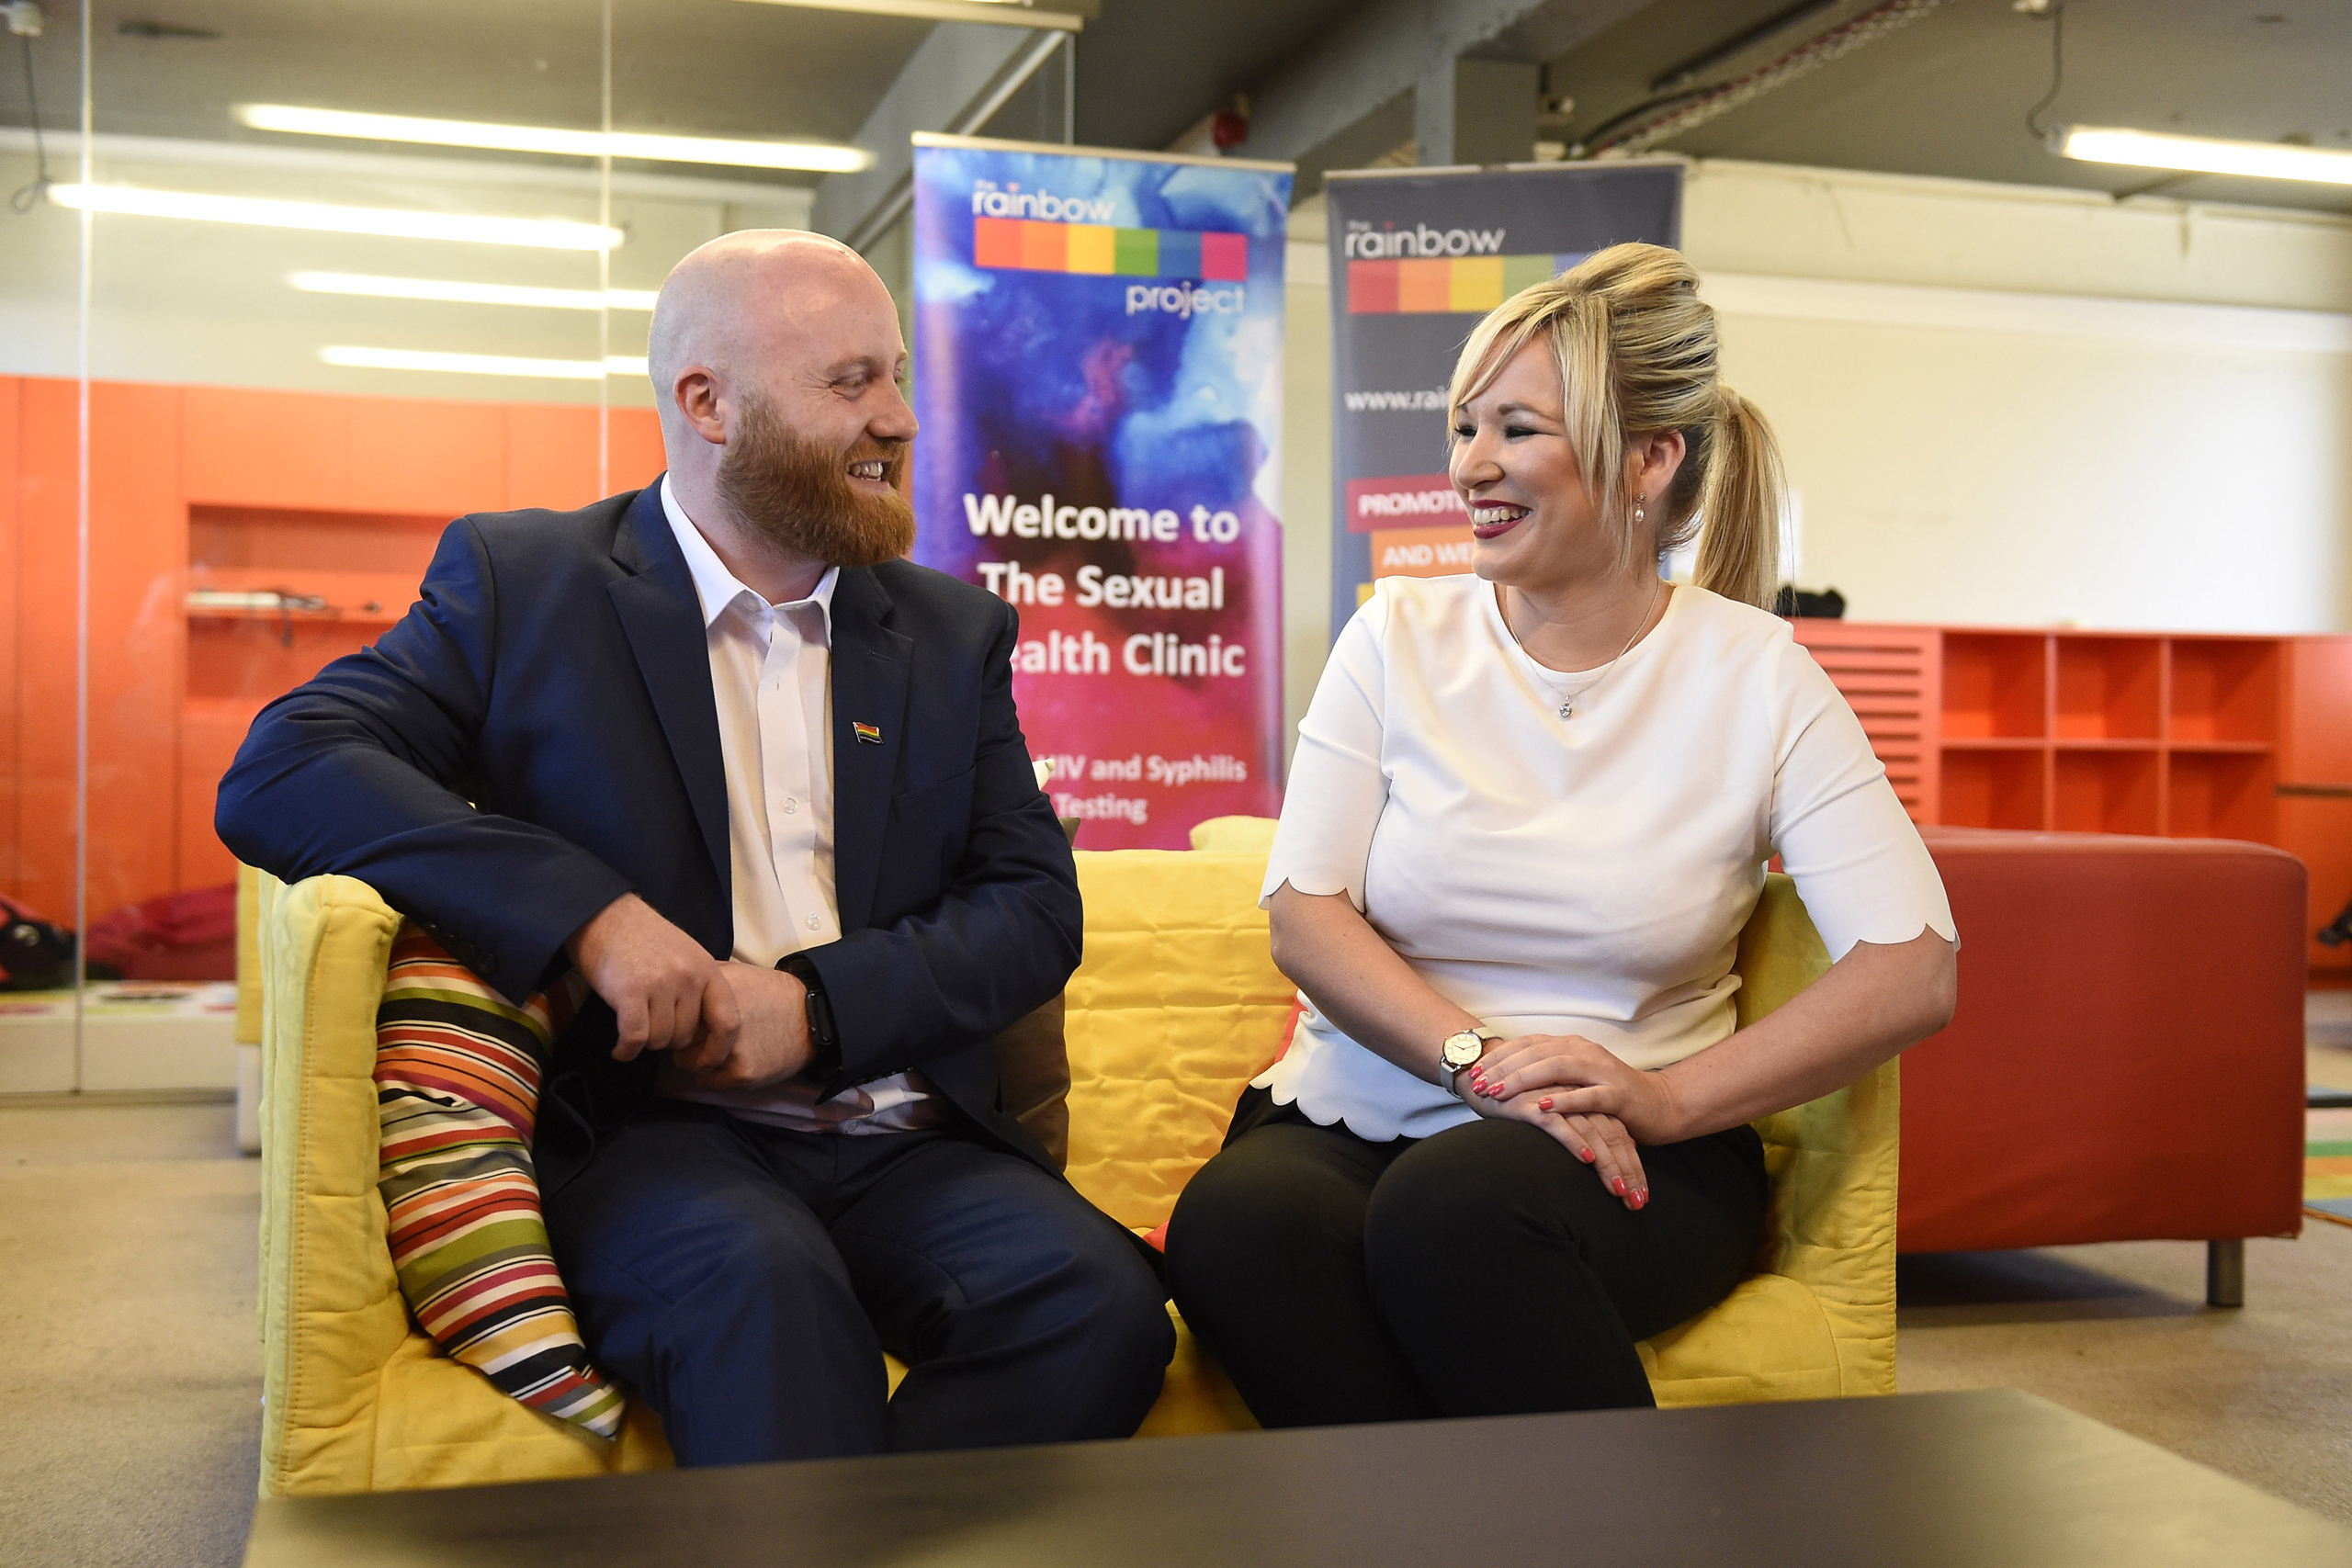 Health Minister Michelle O'Neill with John O'Doherty from The Rainbow Project which supports the LGBT community, at the organization's offices in Belfast, June 2, 2016. (Michael Cooper—PA Wire/AP)